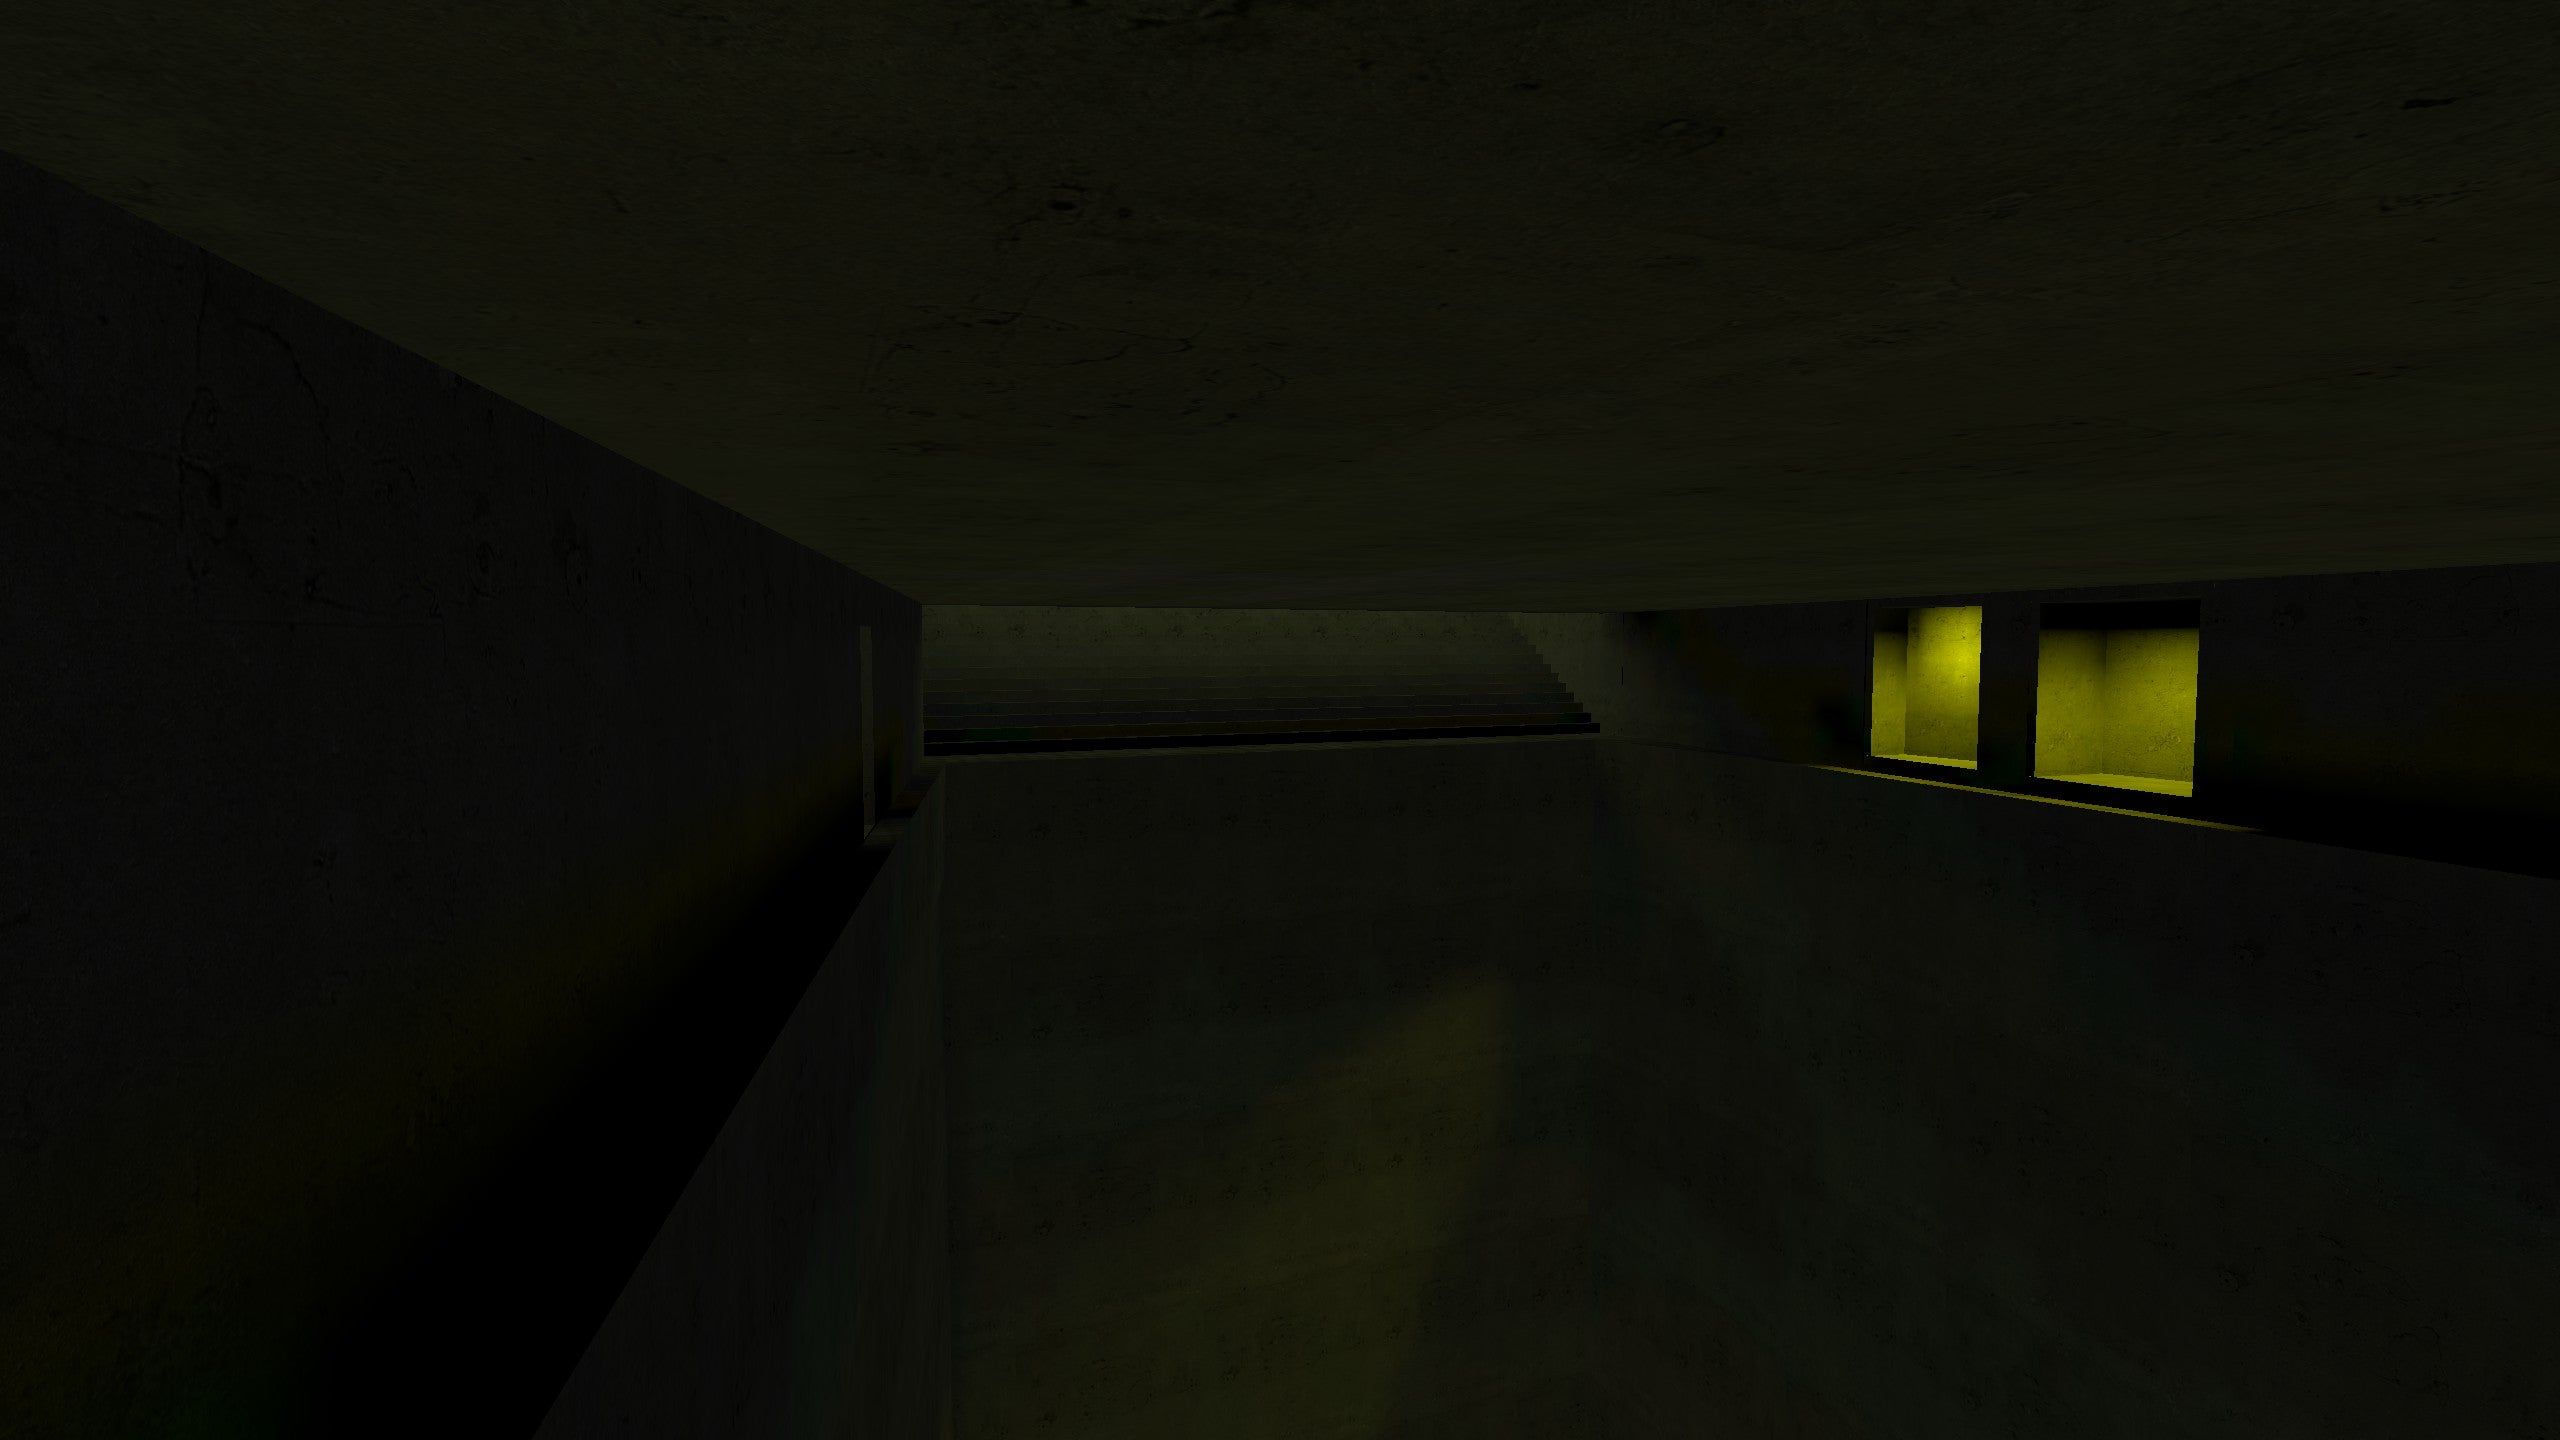 First attempt creating a Liminal space using Source Hammer Editor (based off rick amor's work): LiminalSpace